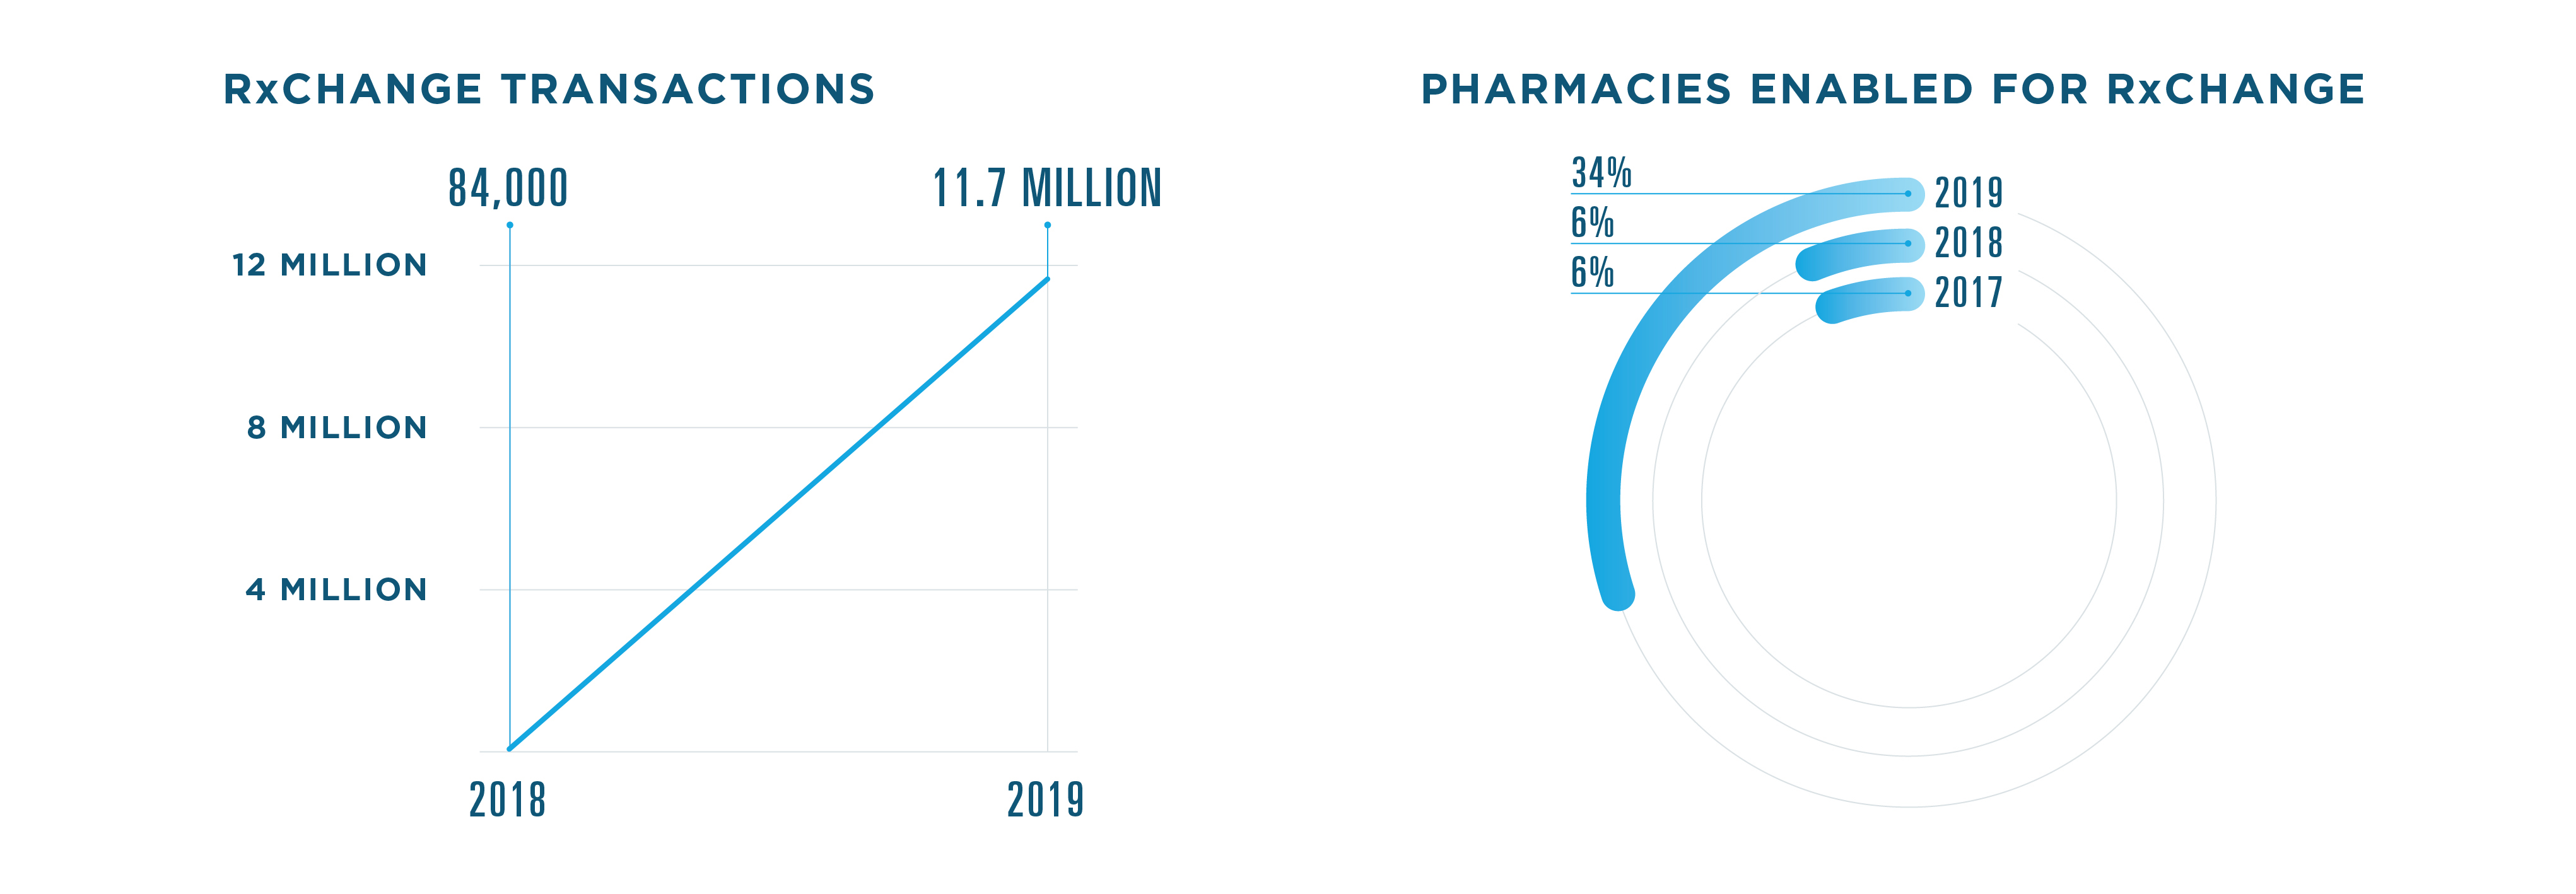 There were 11.7 million RxChange transactions in 2019, compared to 84,000 in 2018. In 2019, 34% of pharmacies were enabled for RxChange, compared to 6% in 2018 and 2017.